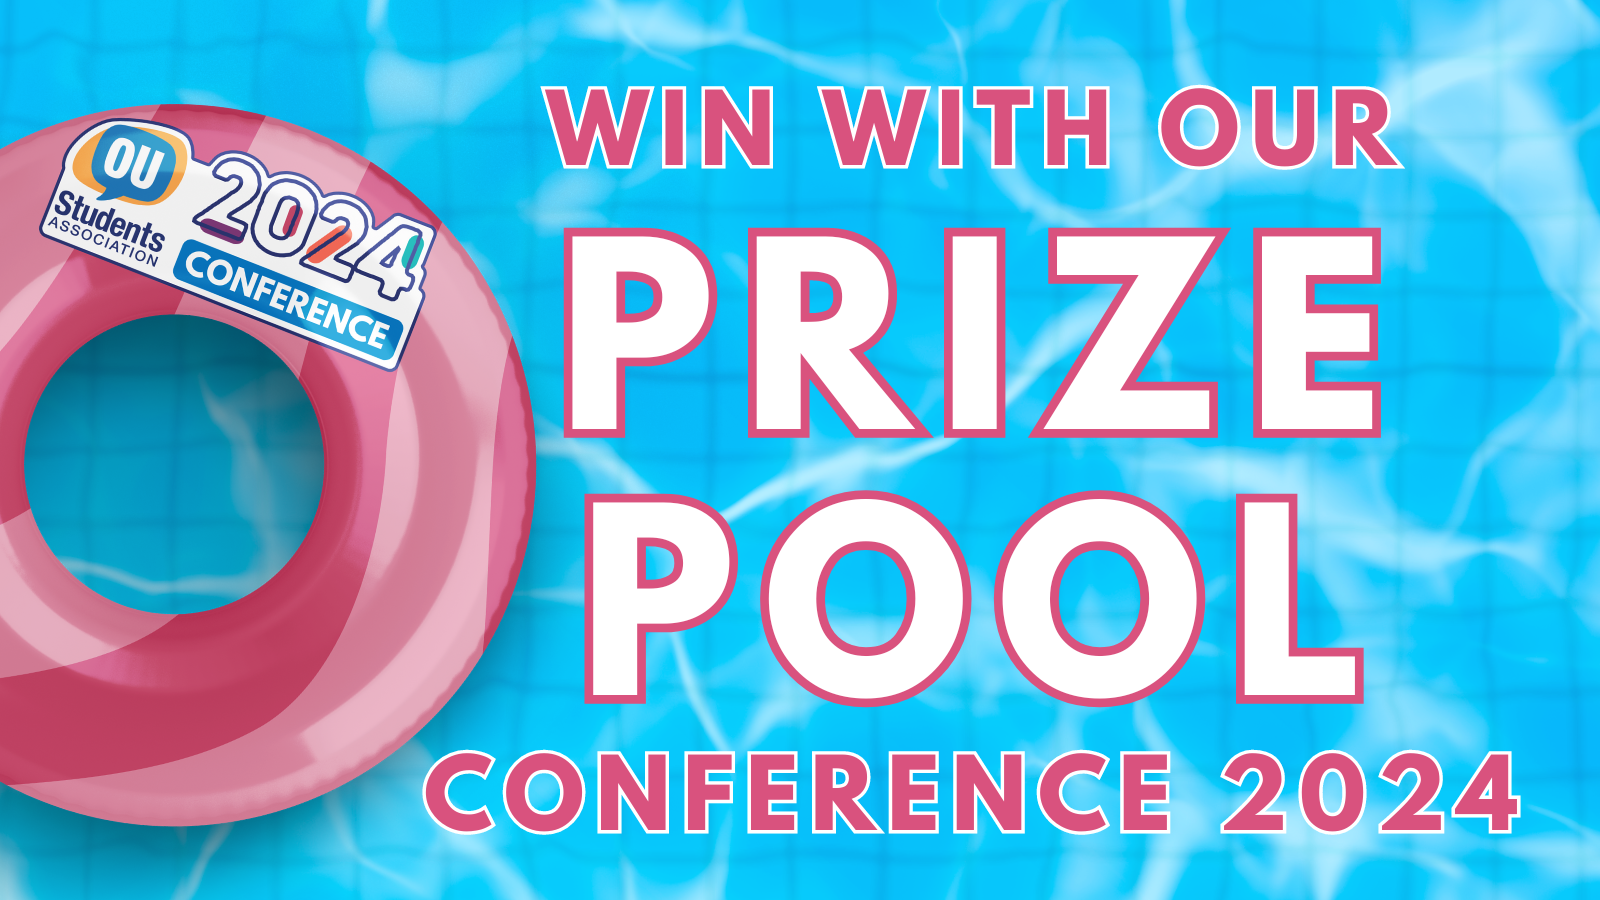 Press here to view all the prizes available in the conference prize pool.